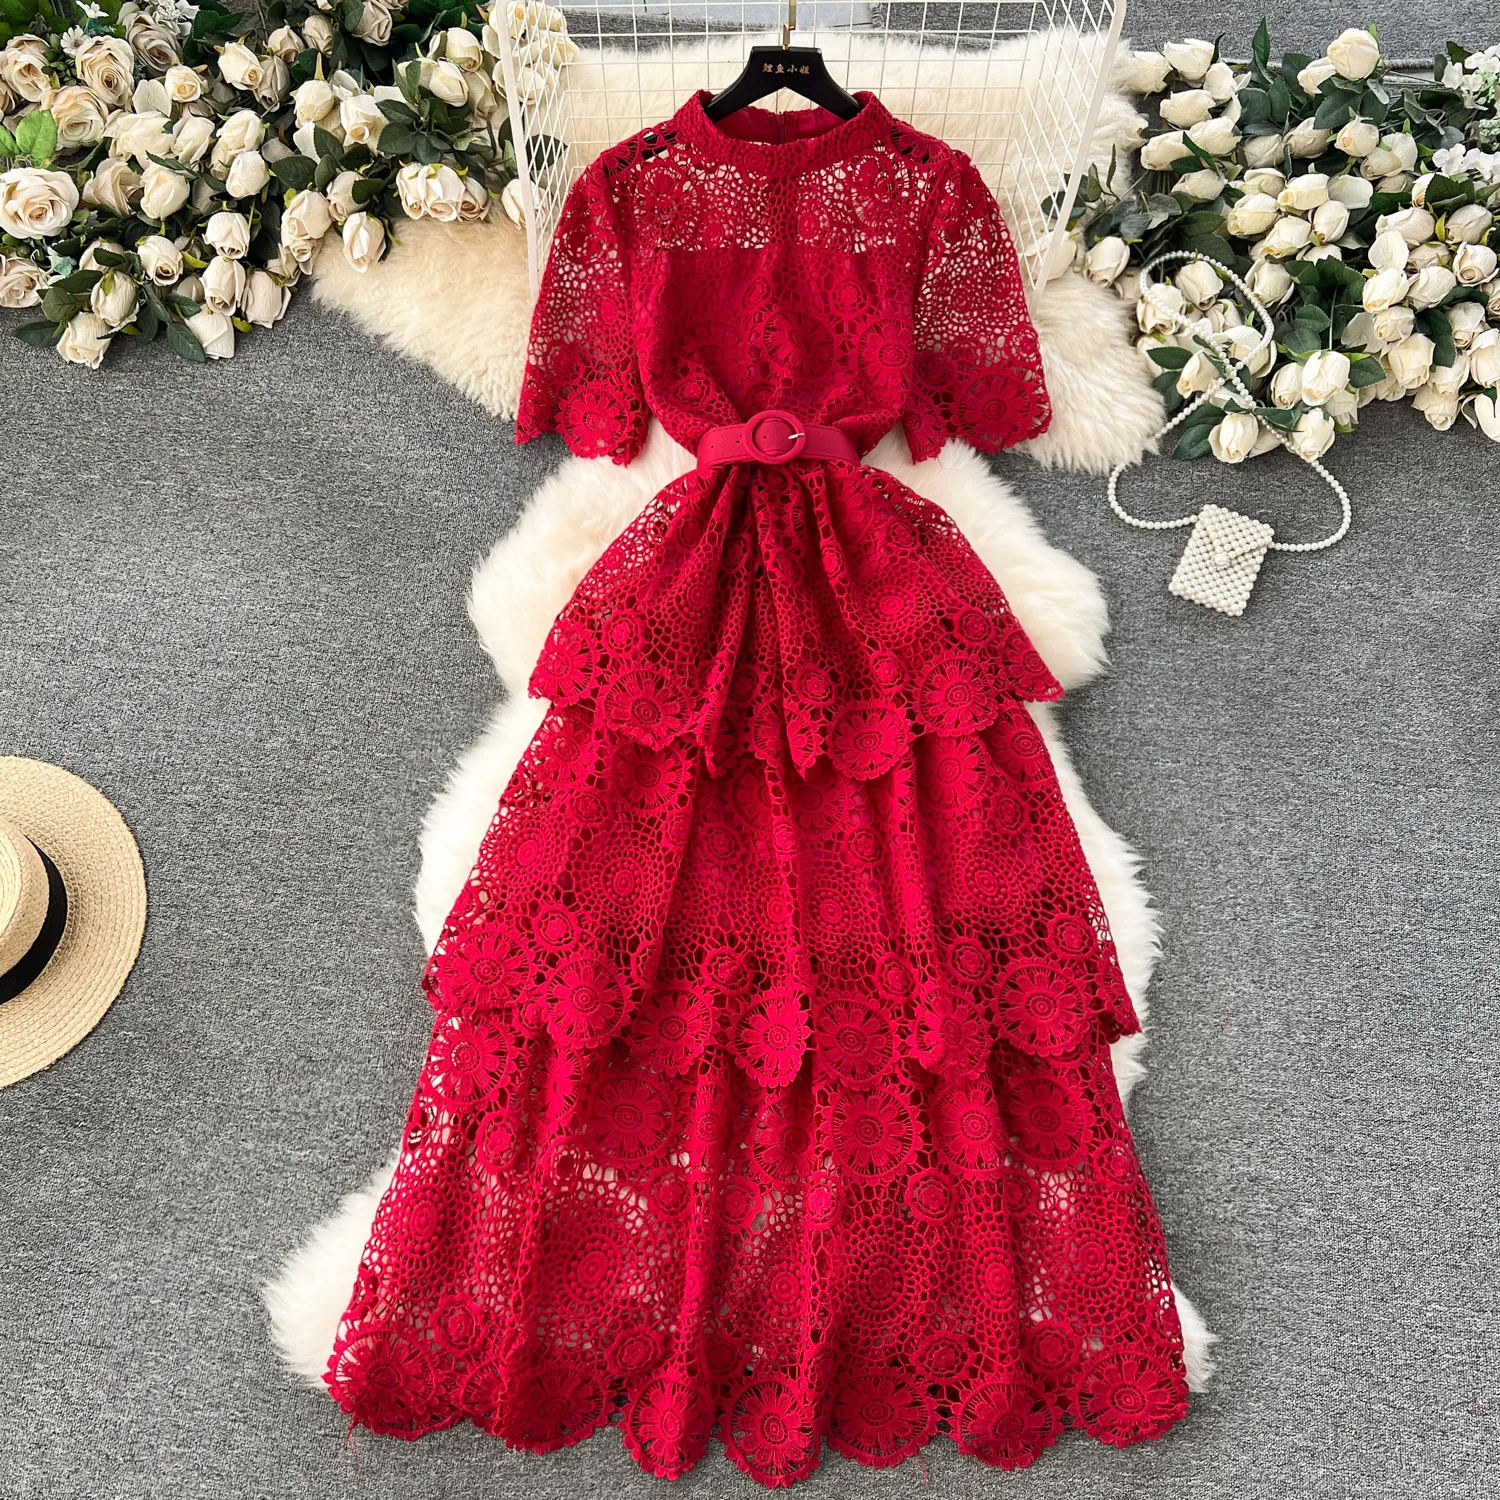 Light Luxury Heavy Industry Hollowed out Carved Lace Dress for Women's High Grade Multi layered Ruffle Edge Cake Dress, Celebrity Style Dress